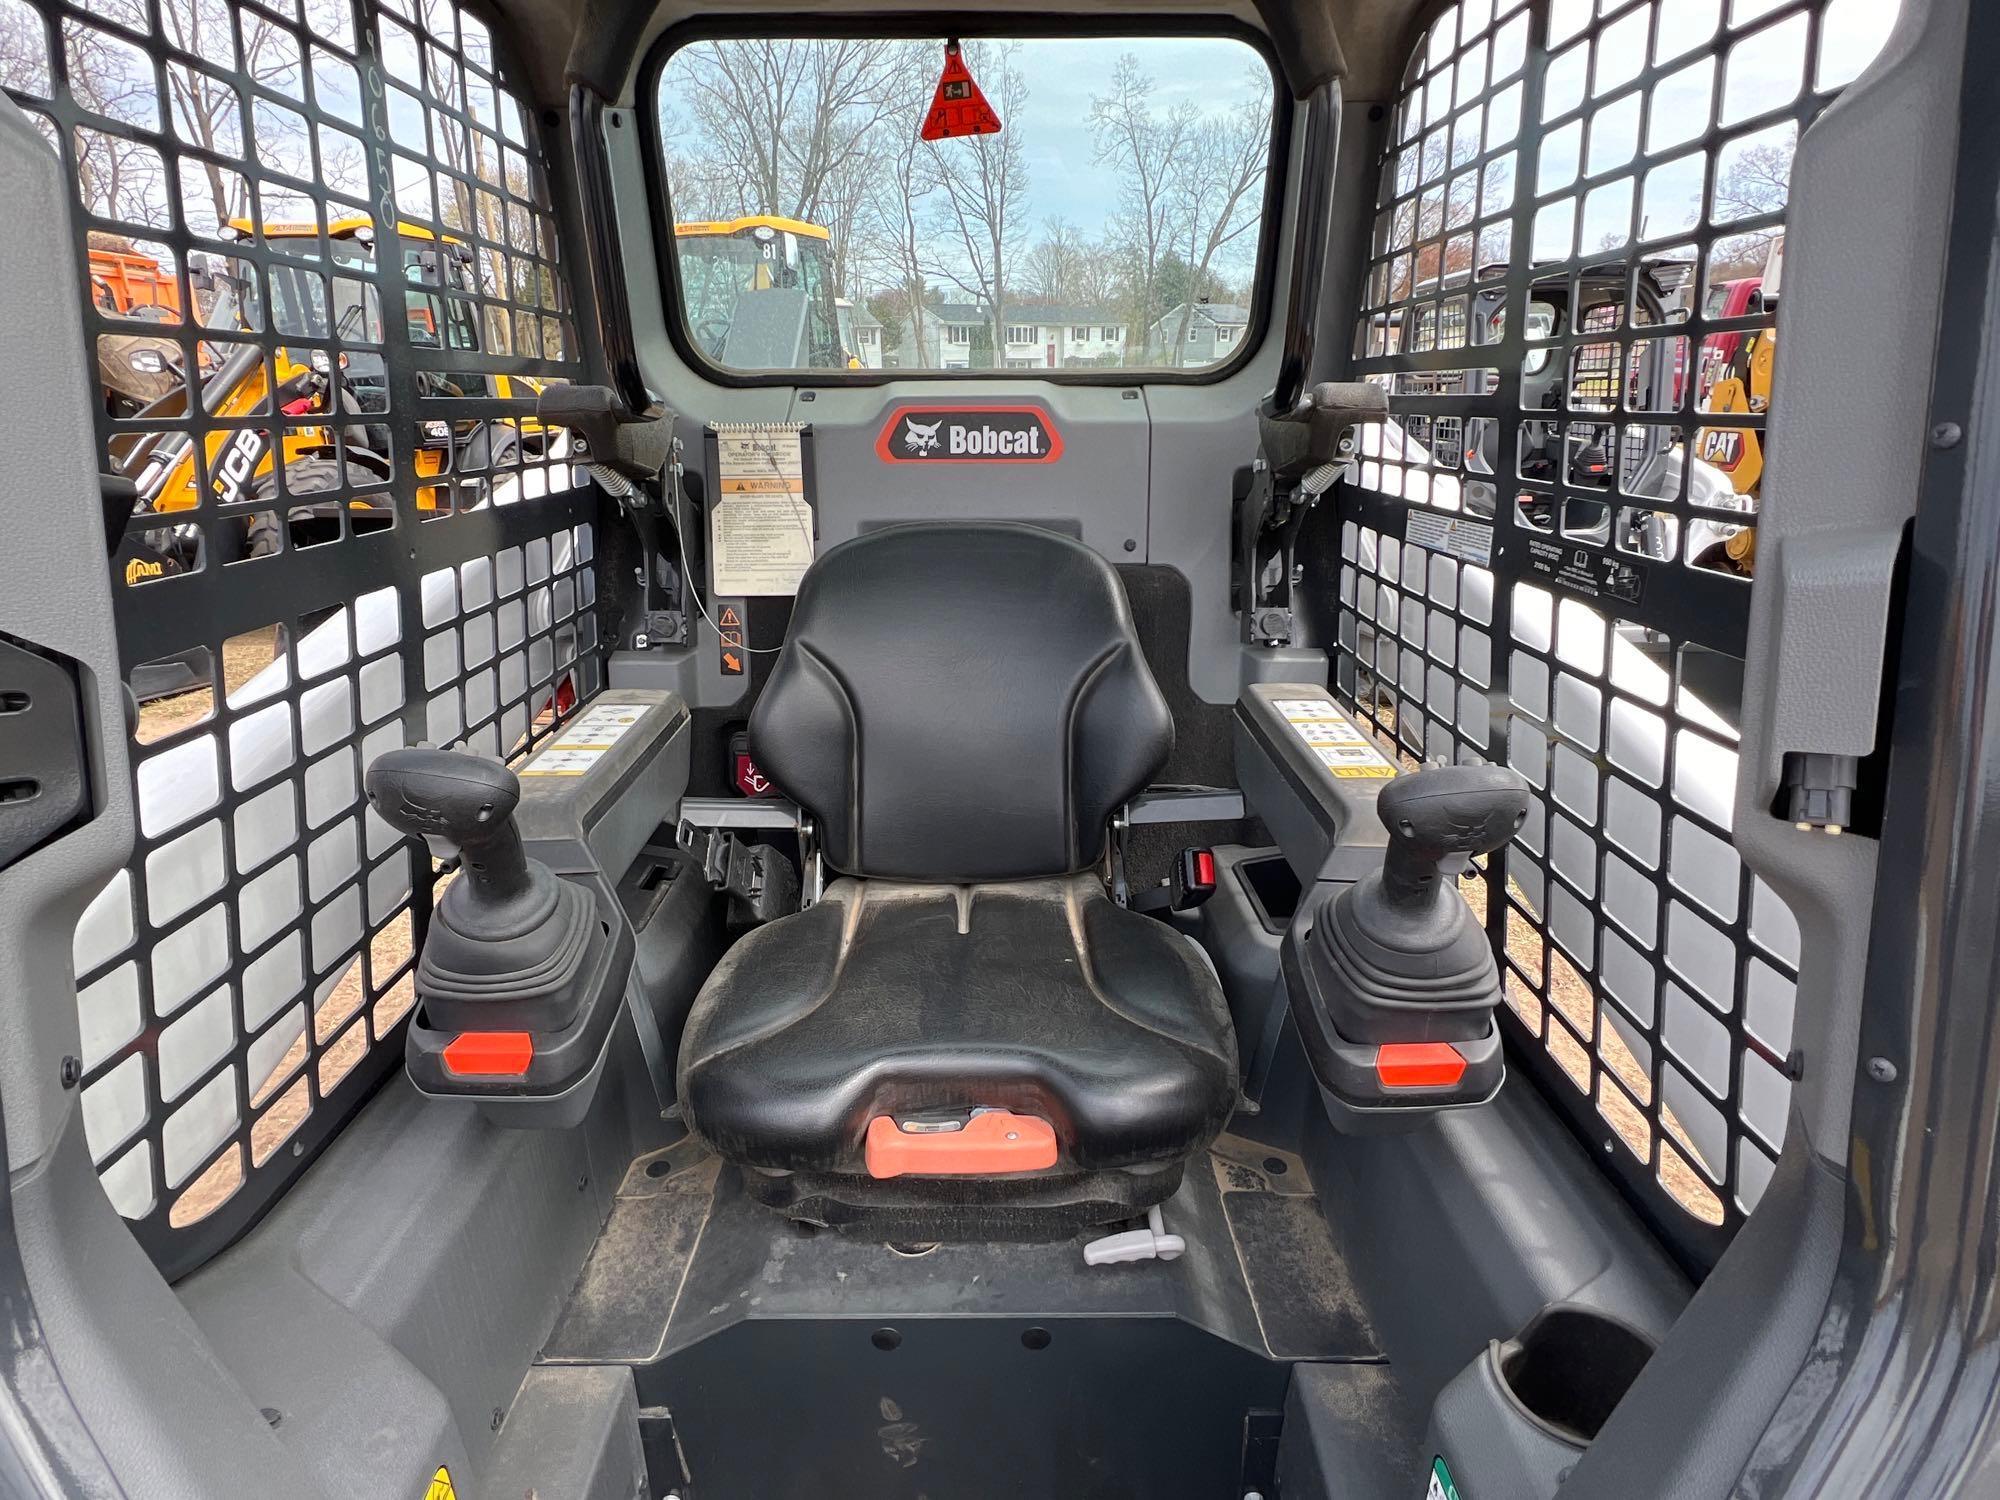 2023 BOBCAT S62 SKID STEER... SN-20246 powered by diesel engine, equipped with rollcage, auxiliary